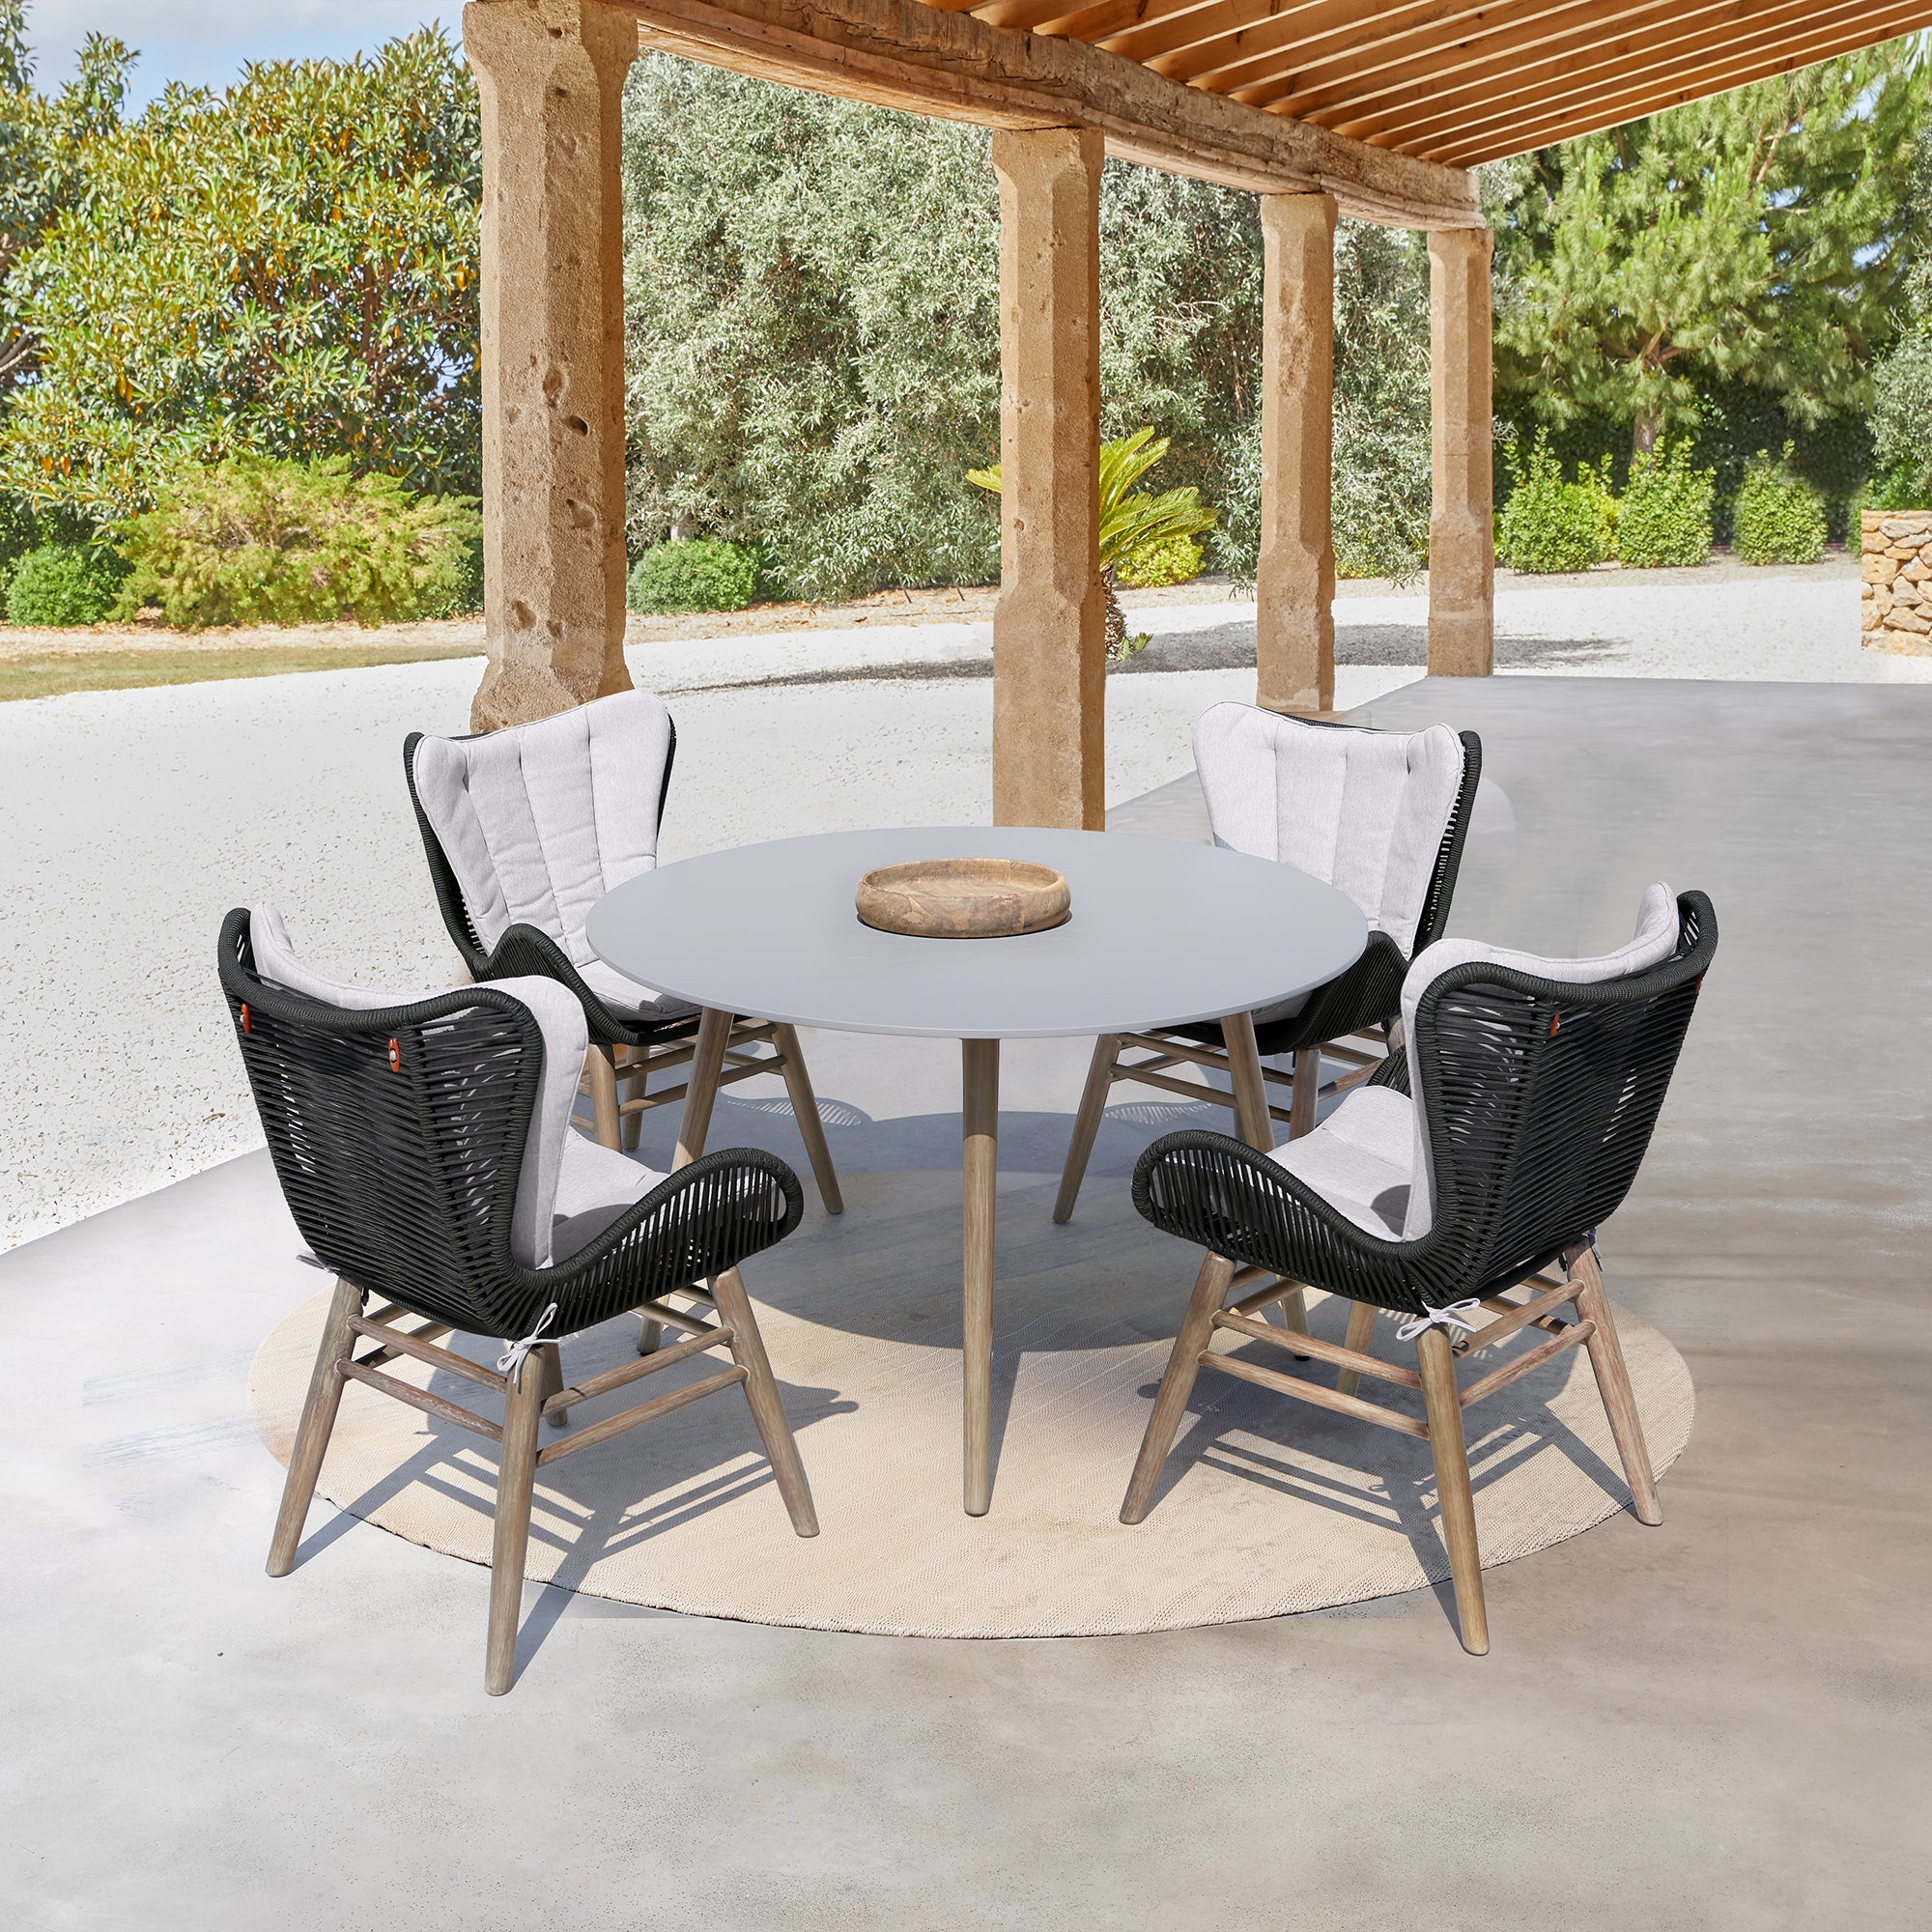 Armen Living - Sydney and Fanny 5 Piece Outdoor Patio Dining Set in Eucalyptus Wood with Rope and Grey Cushions - 840254335981